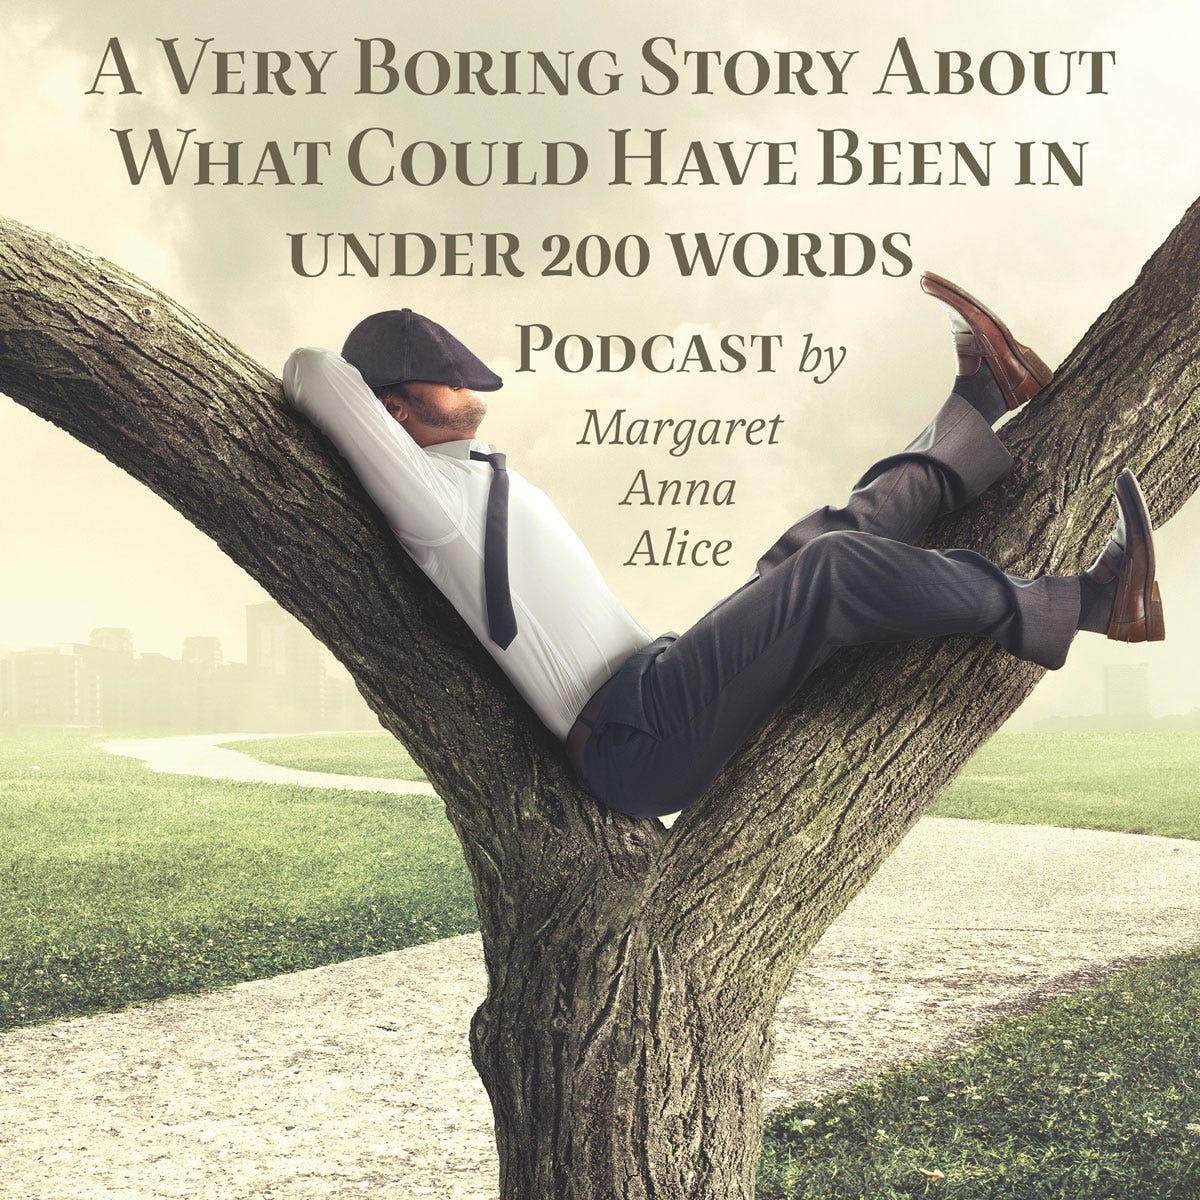 A Very Boring Story About What Could Have Been in Under 200 Words; Man Napping in Crook of Tree with Hat over Face